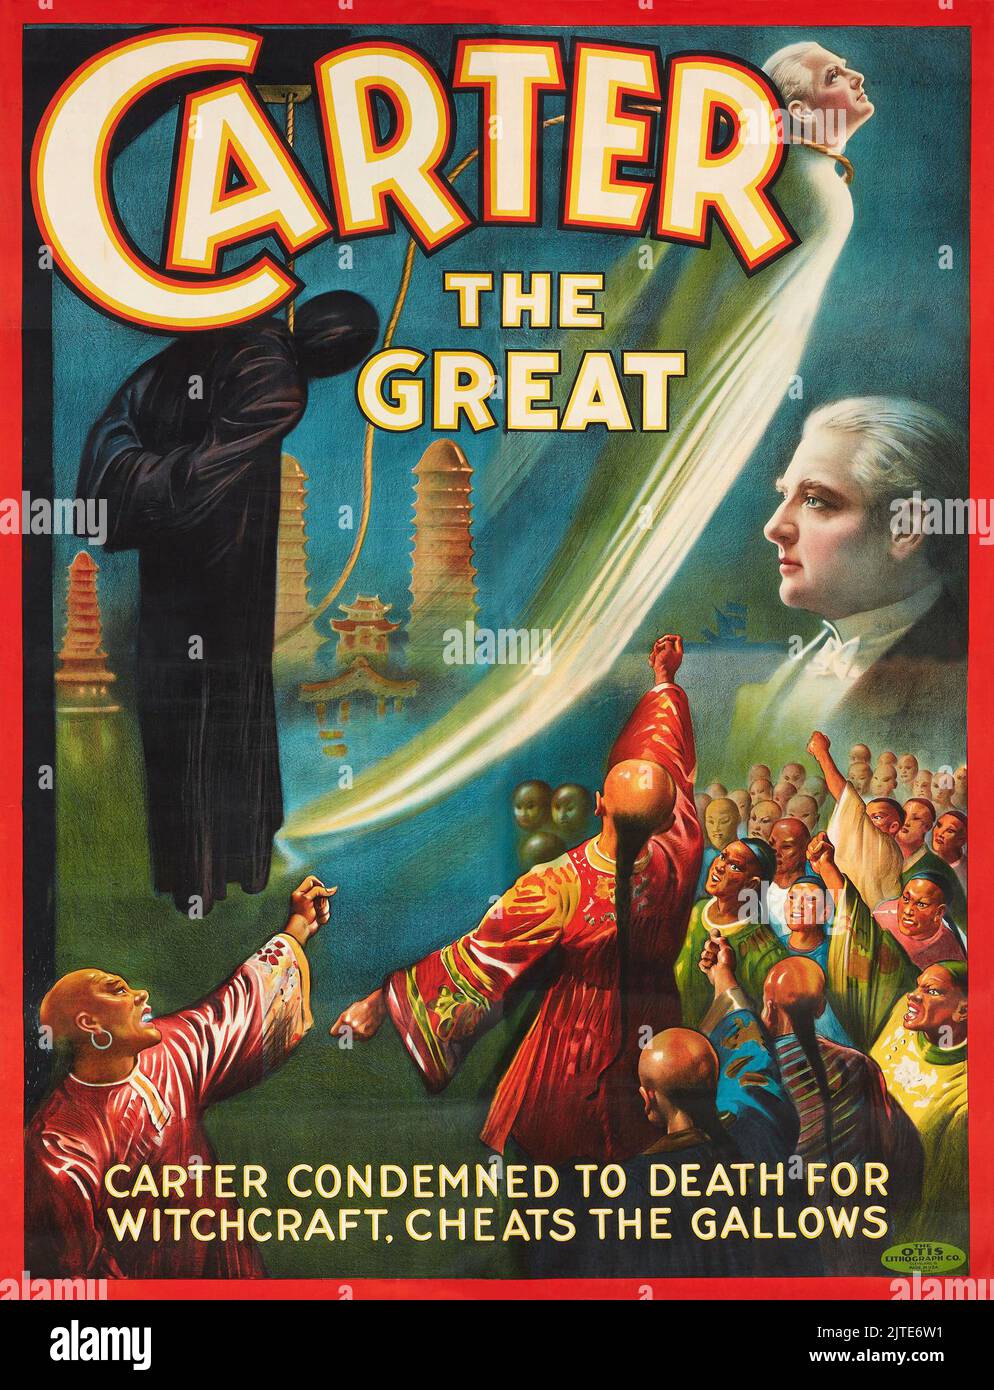 Vintage 1920s Magician Poster for Carter The Great. Carter condemned to death for witchcraft. Cheats the gallows Stock Photo